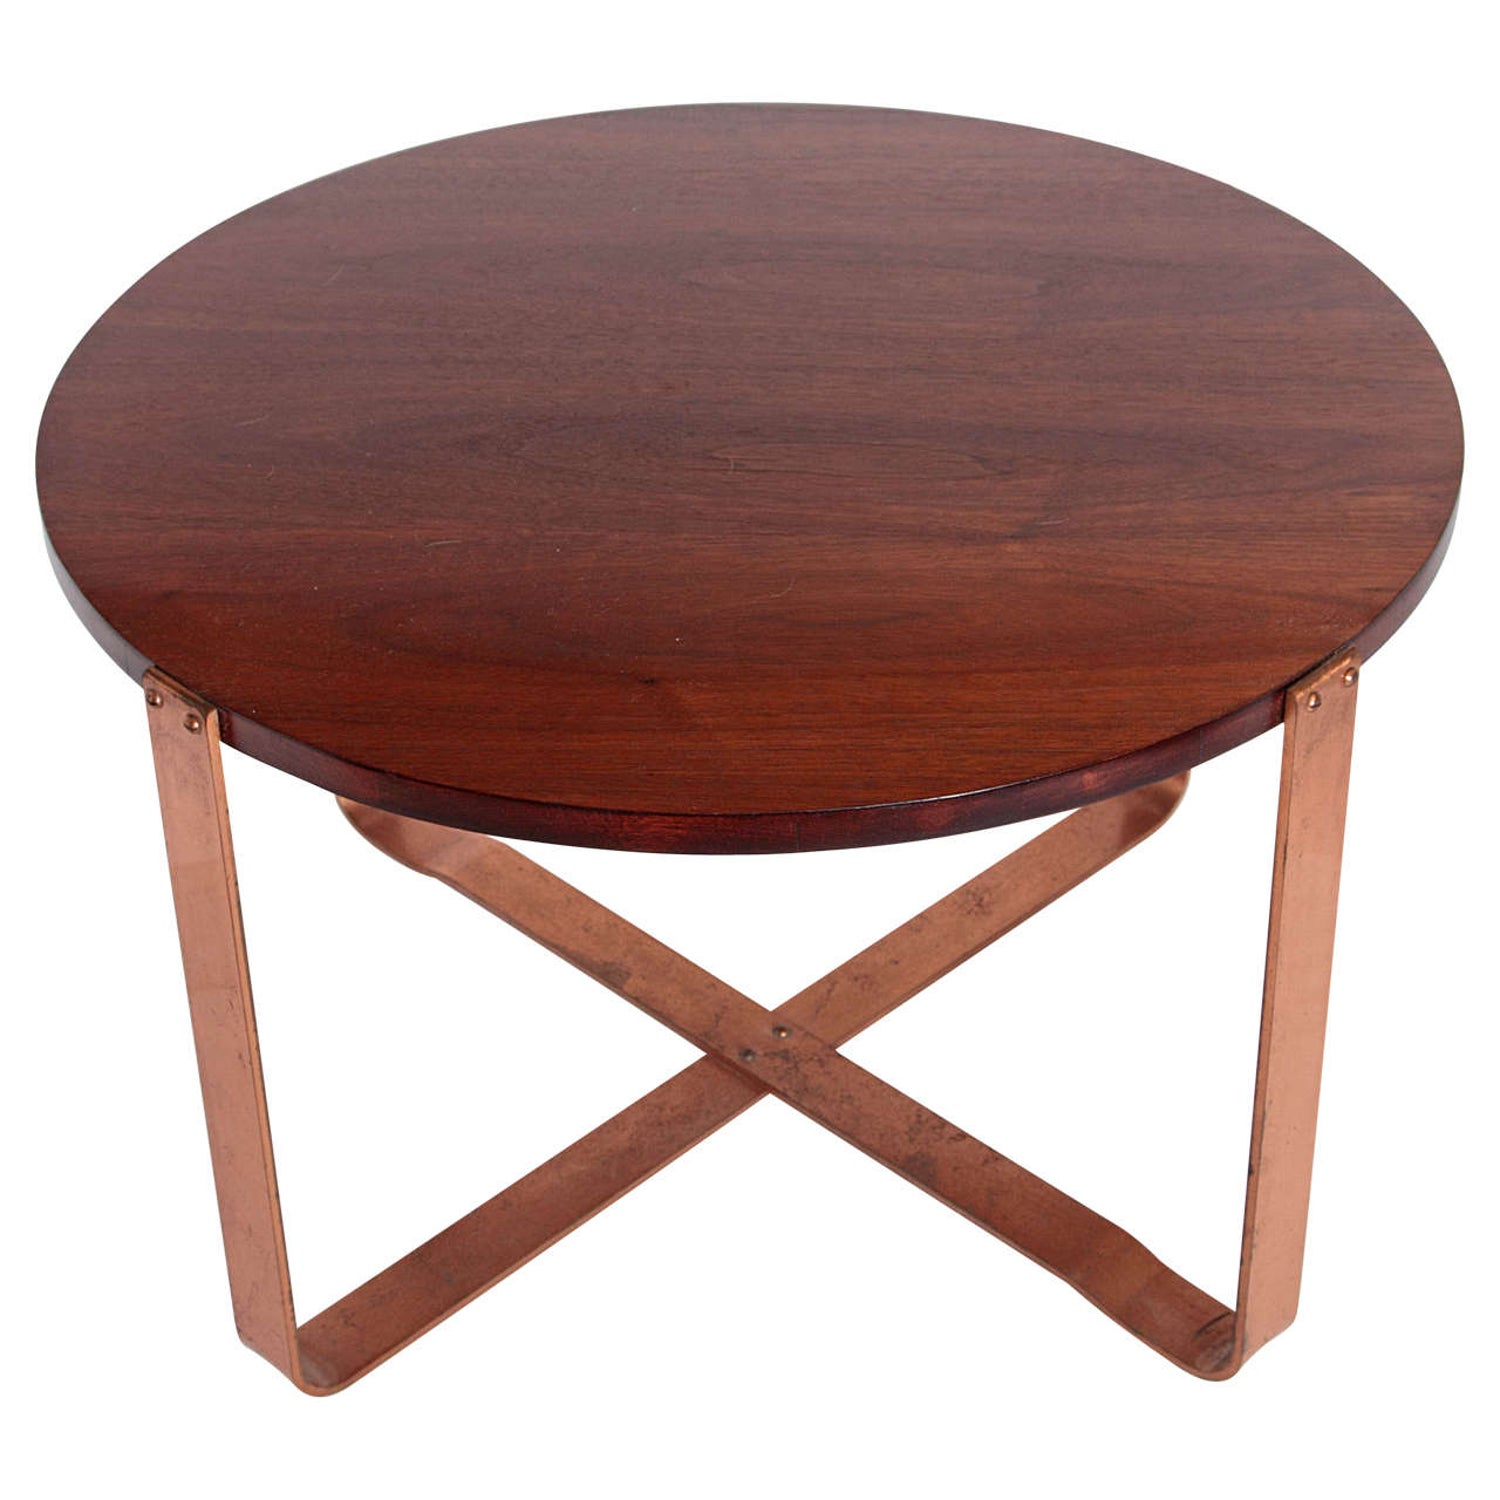 American Art Deco Coffee Table For Sale at 1stDibs